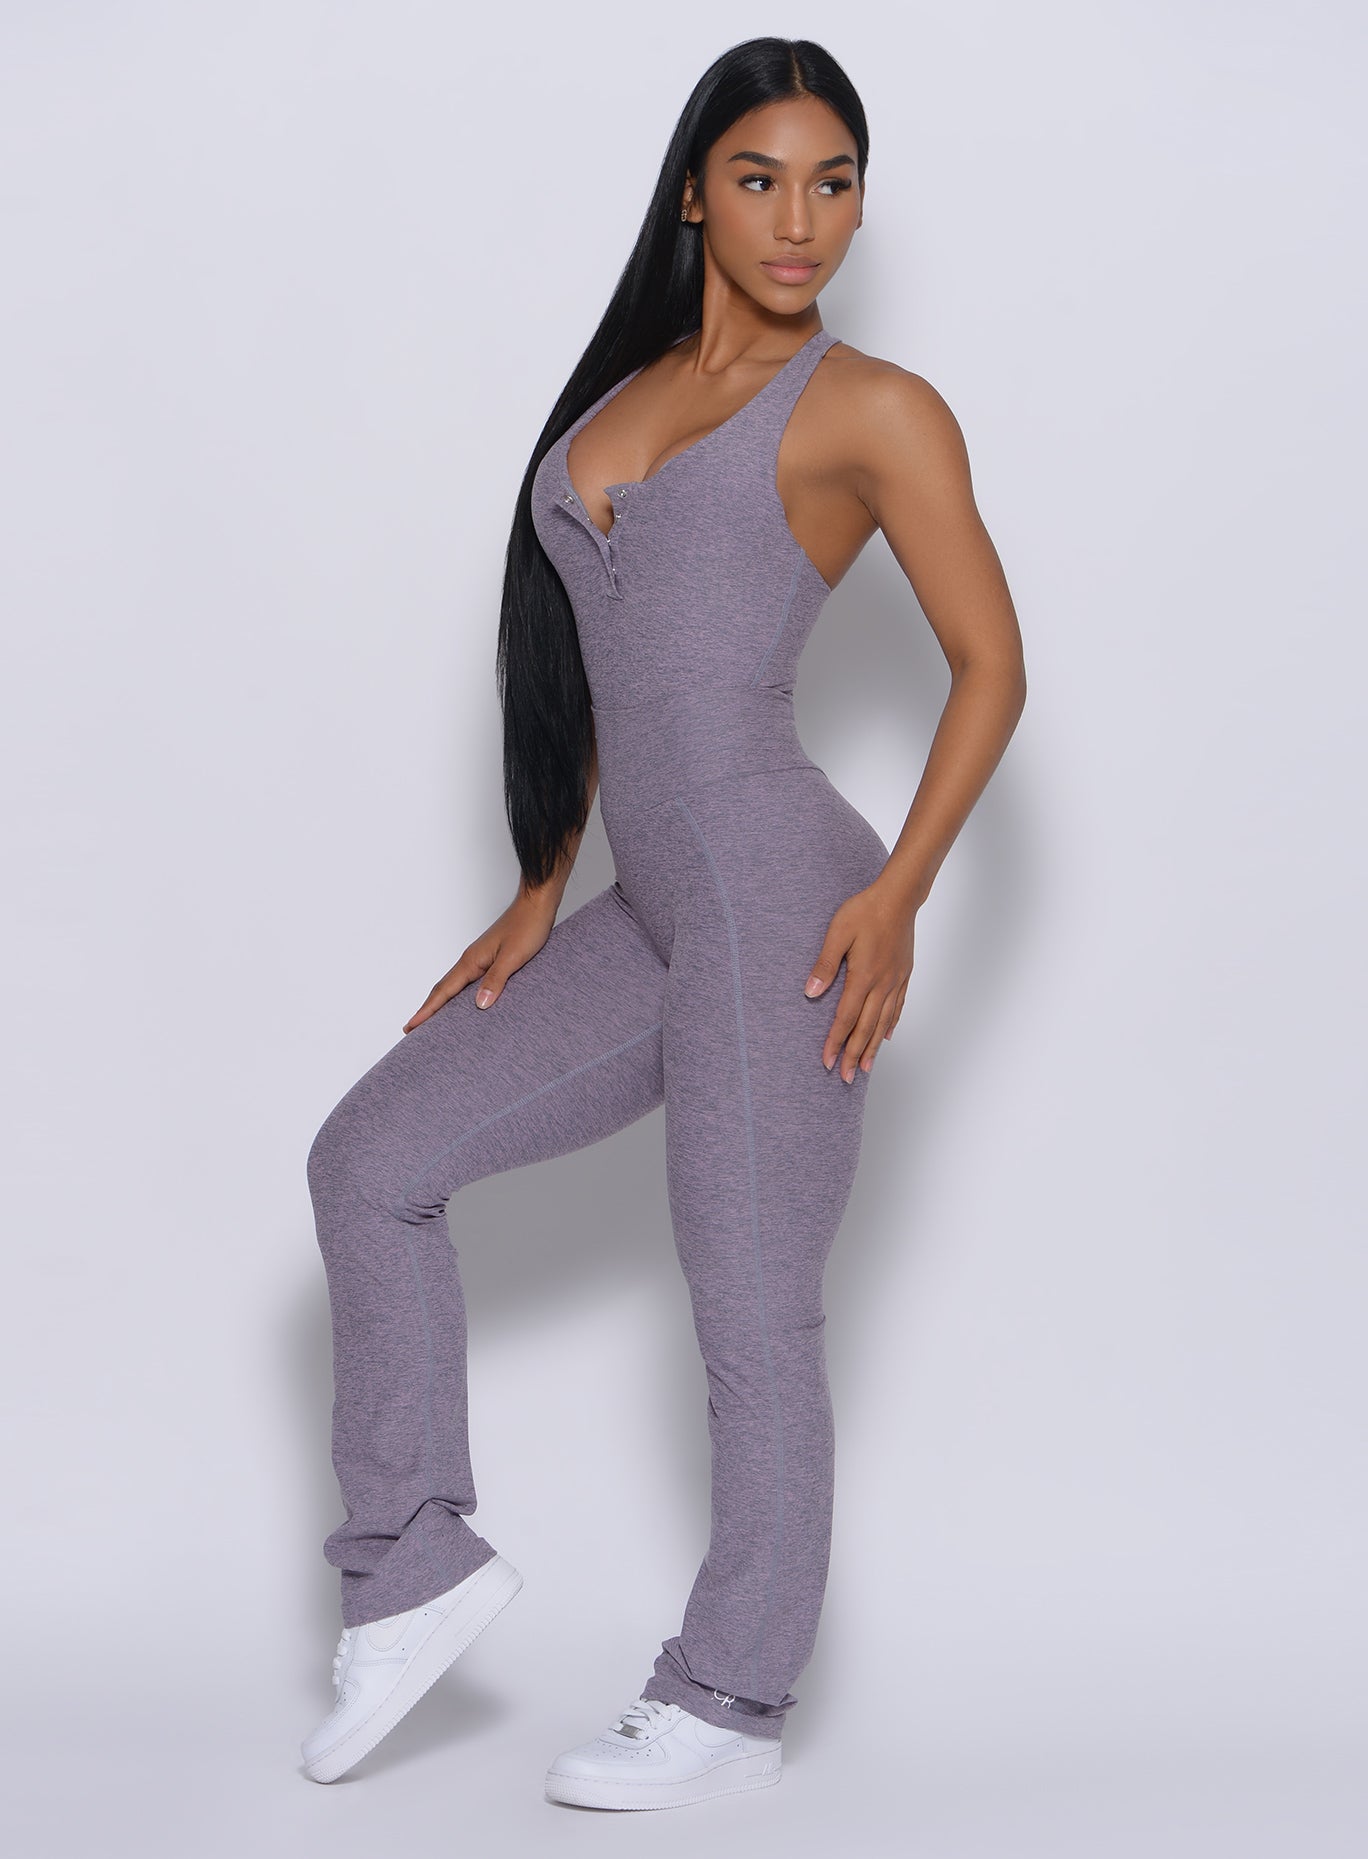 Left side profile view of a model angled left wearing our straight up leggings in orchid color and a matching bodysuit